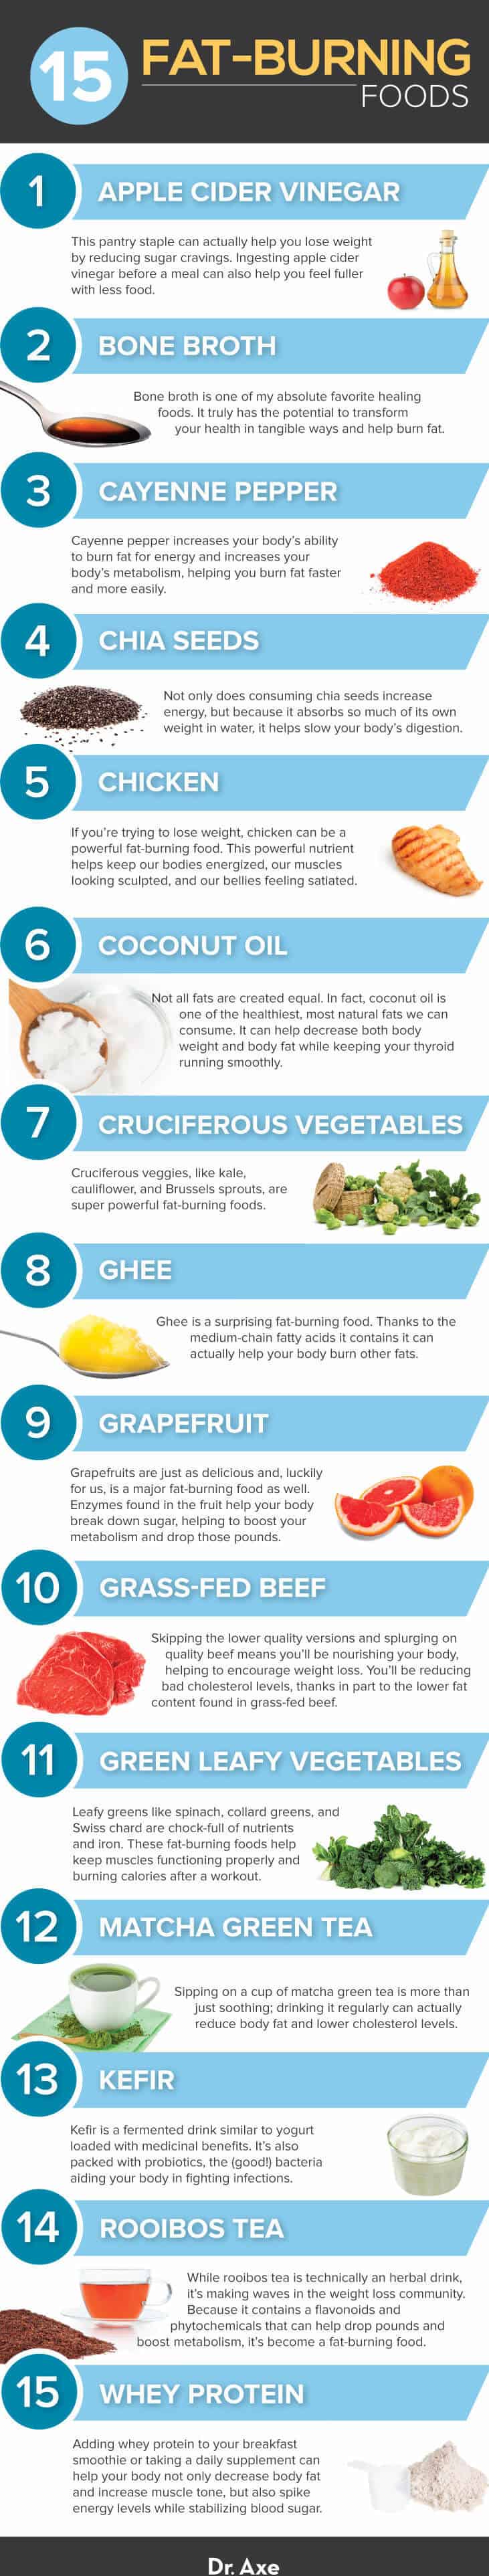 15 Fat-Burning Foods to Supercharge Your Metabolism